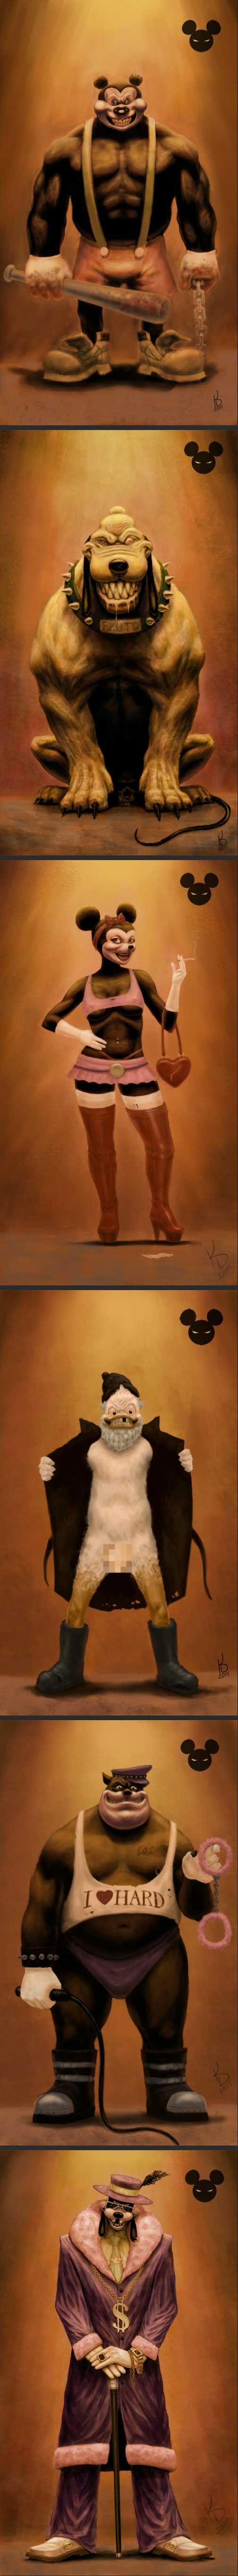 If Disney characters were bad.